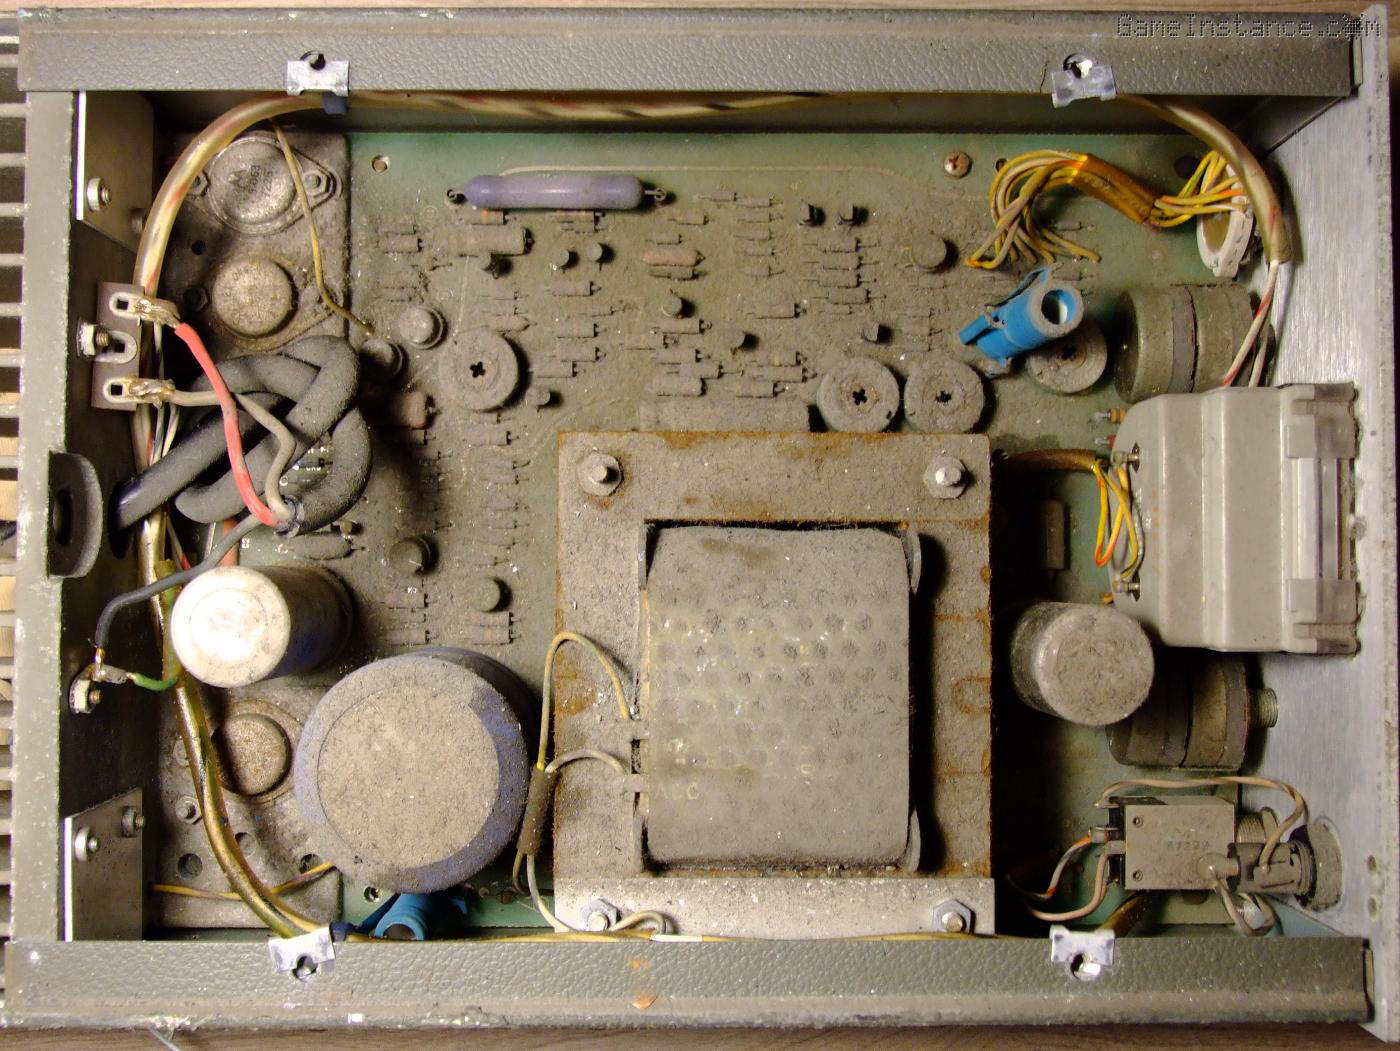 50 years of dust accumulated inside the case of an HP 6289A.